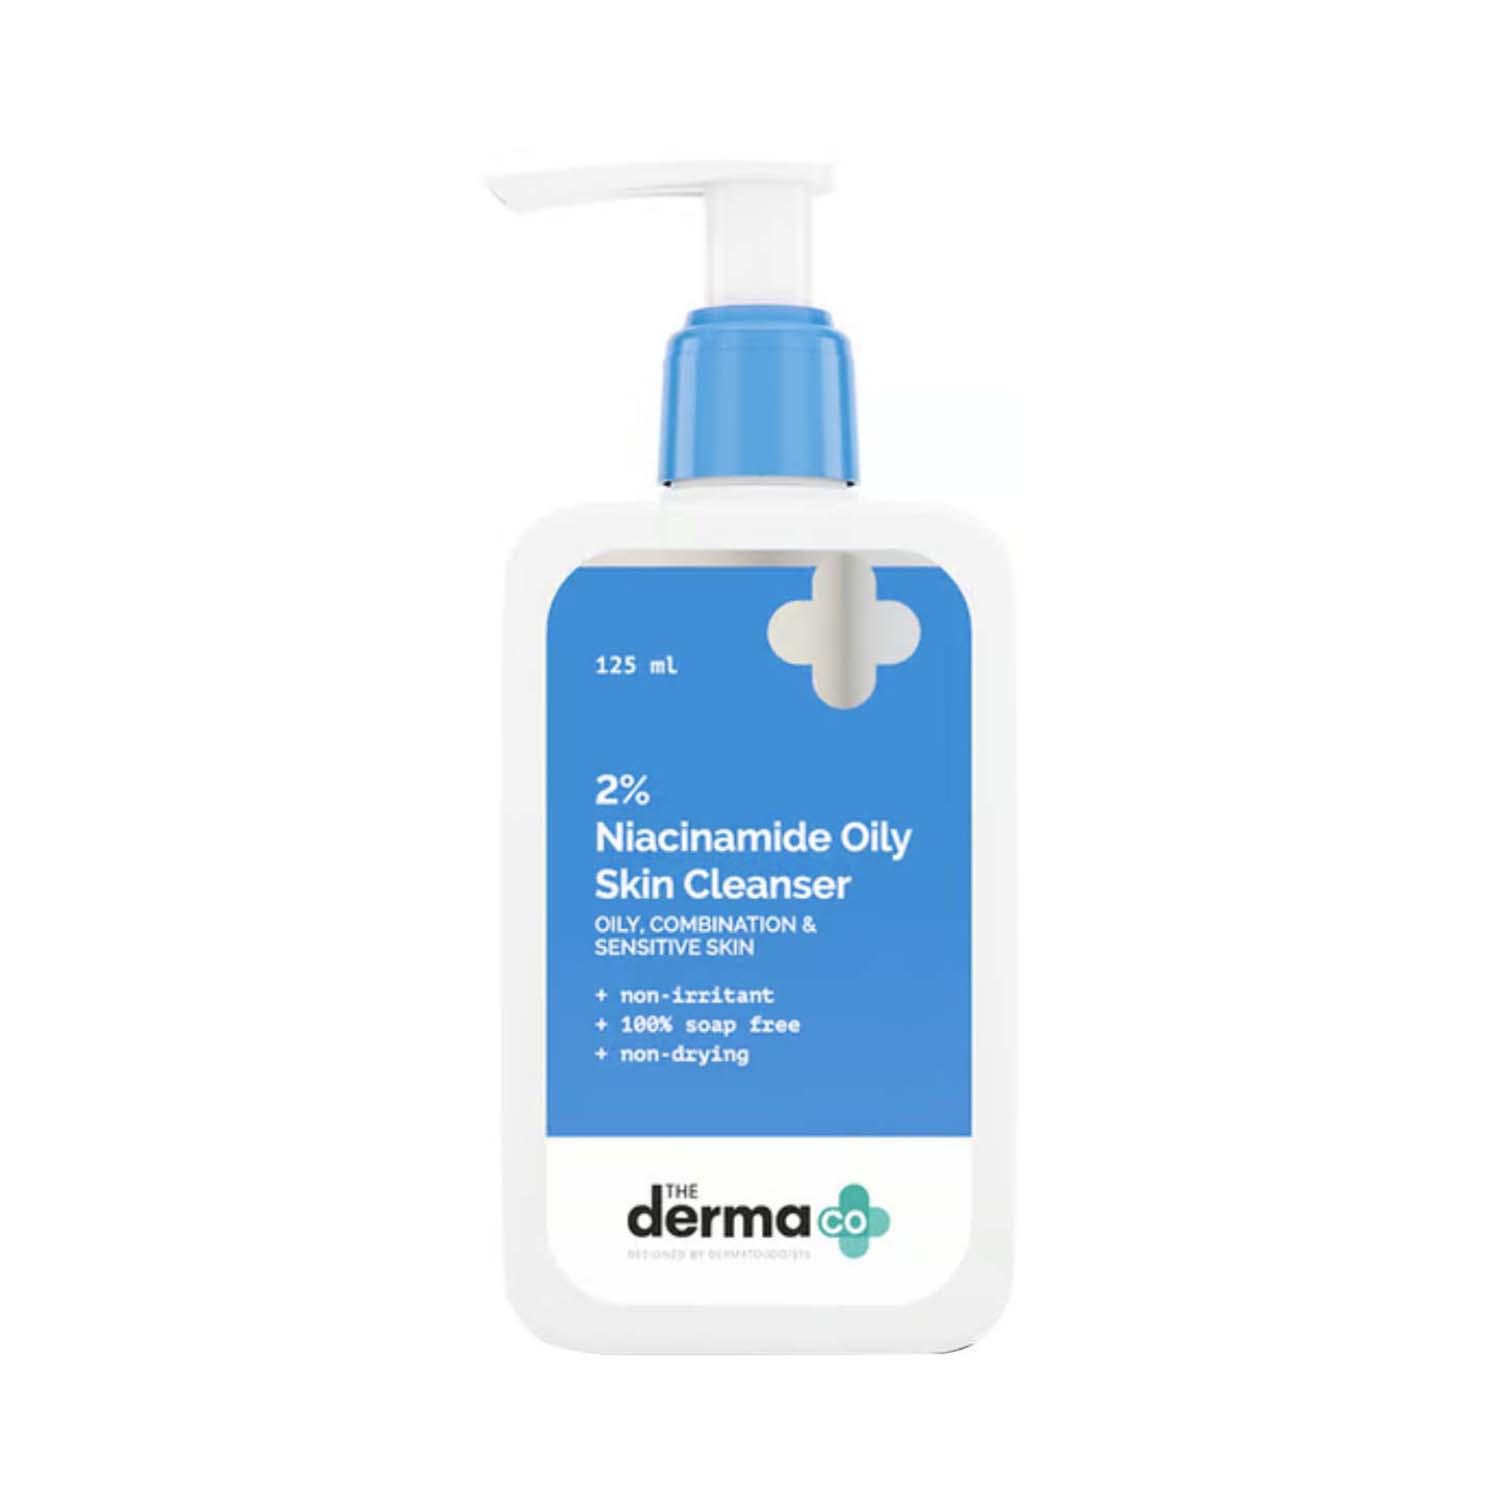 The Derma Co | The Derma Co. 2% Niacinamide Oily Skin Cleanser (125 ml)